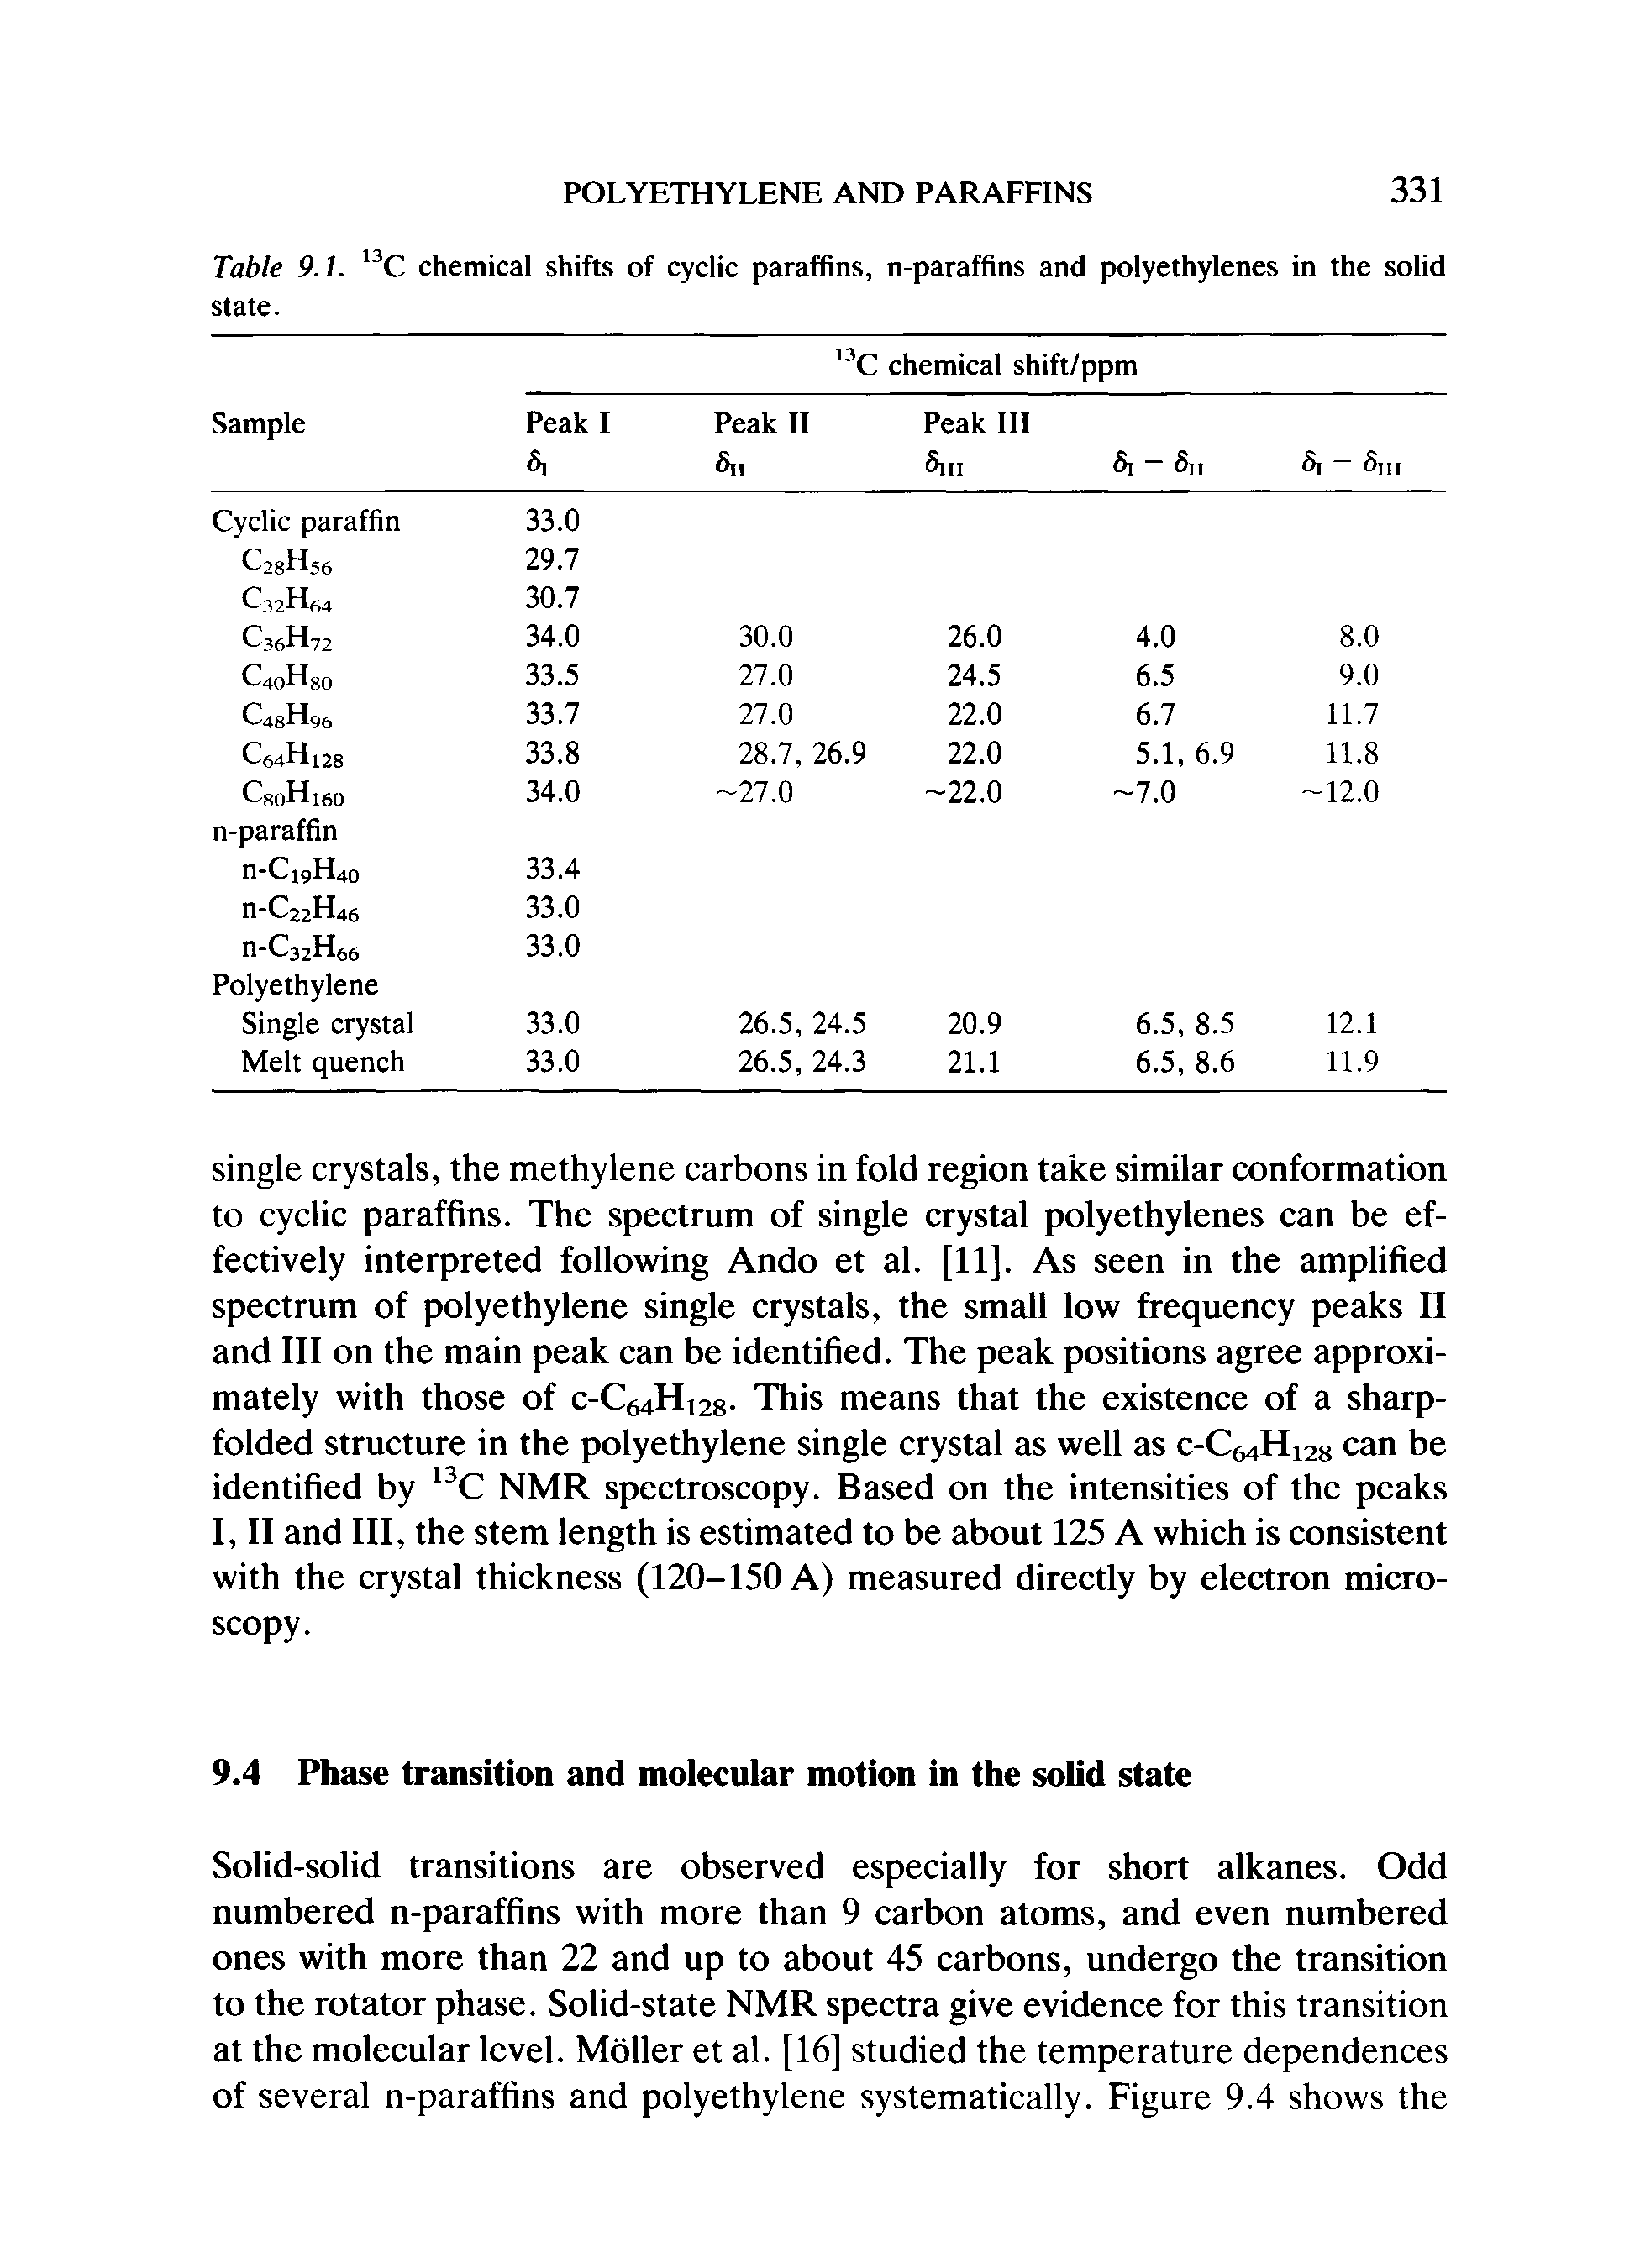 Table 9.1. C chemical shifts of cyclic paraffins, n-paraffins and polyethylenes in the solid state.